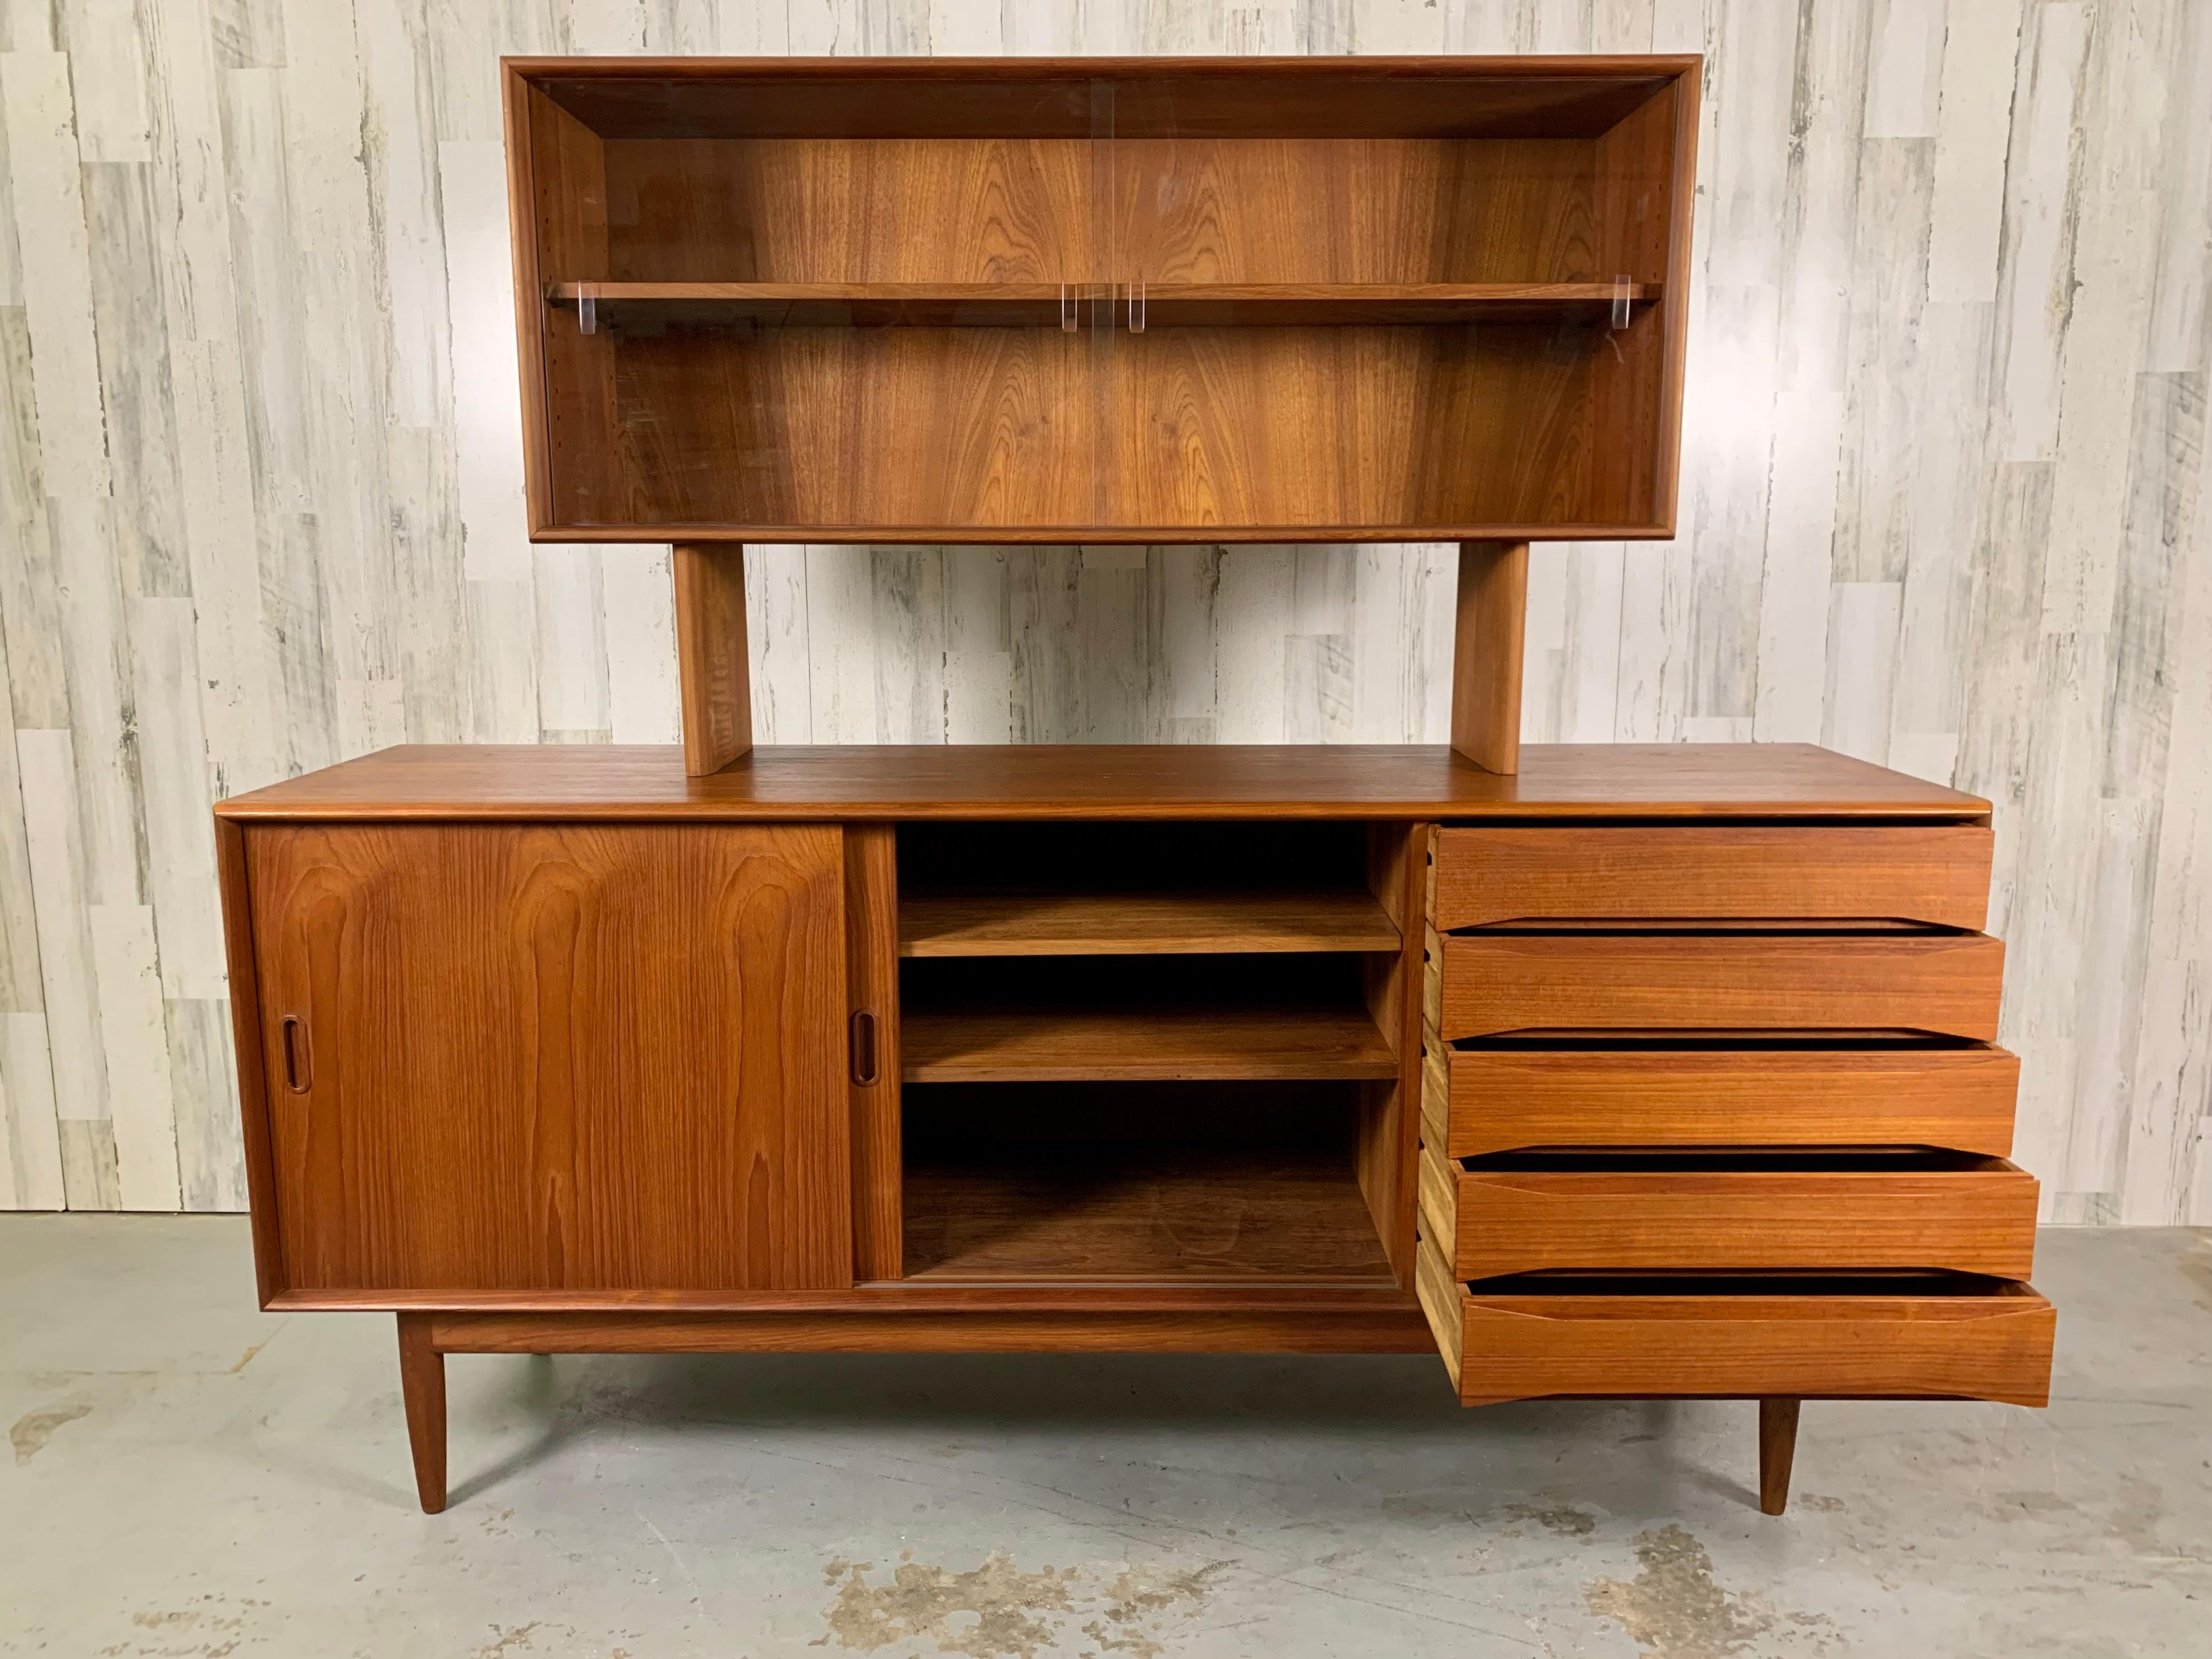 20th Century Solid Teak Credenza with Hutch by Johannes Aasbjerg